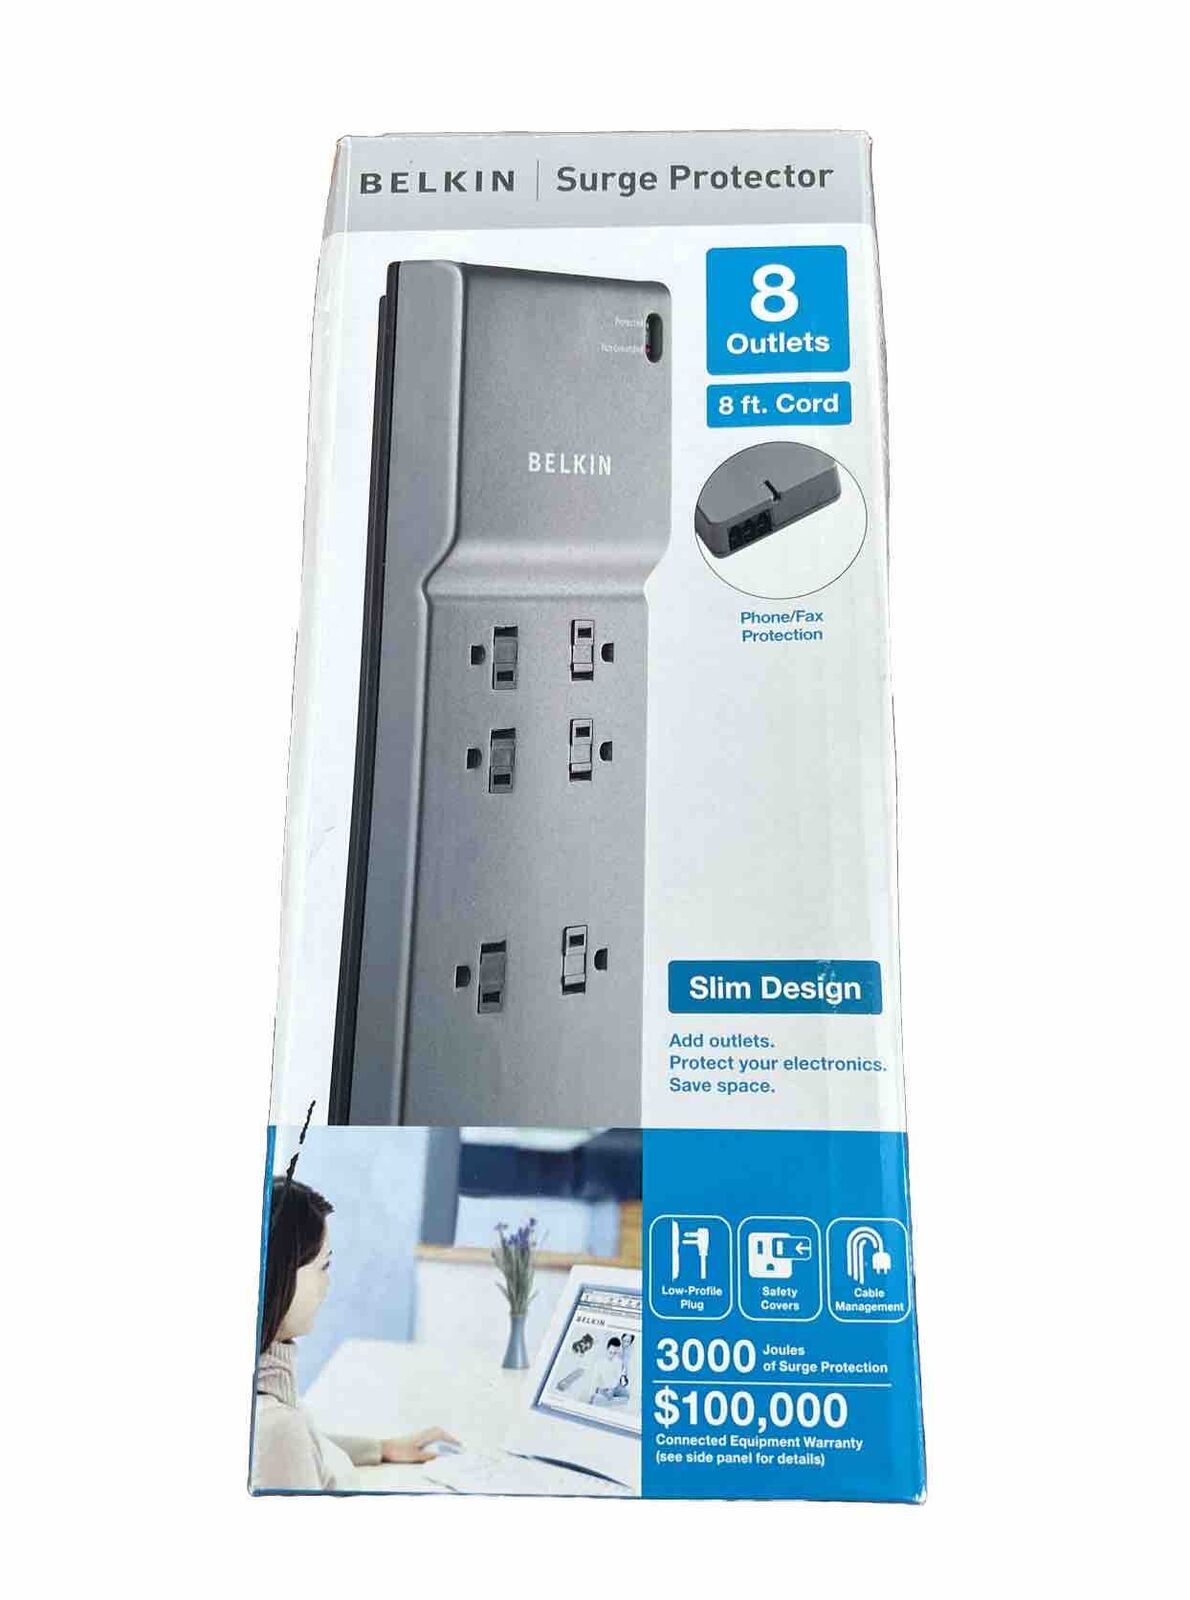 Belkin Surgemaster Office 8 Outlets Surge Protector 8 Foot Cord 3000 Joules